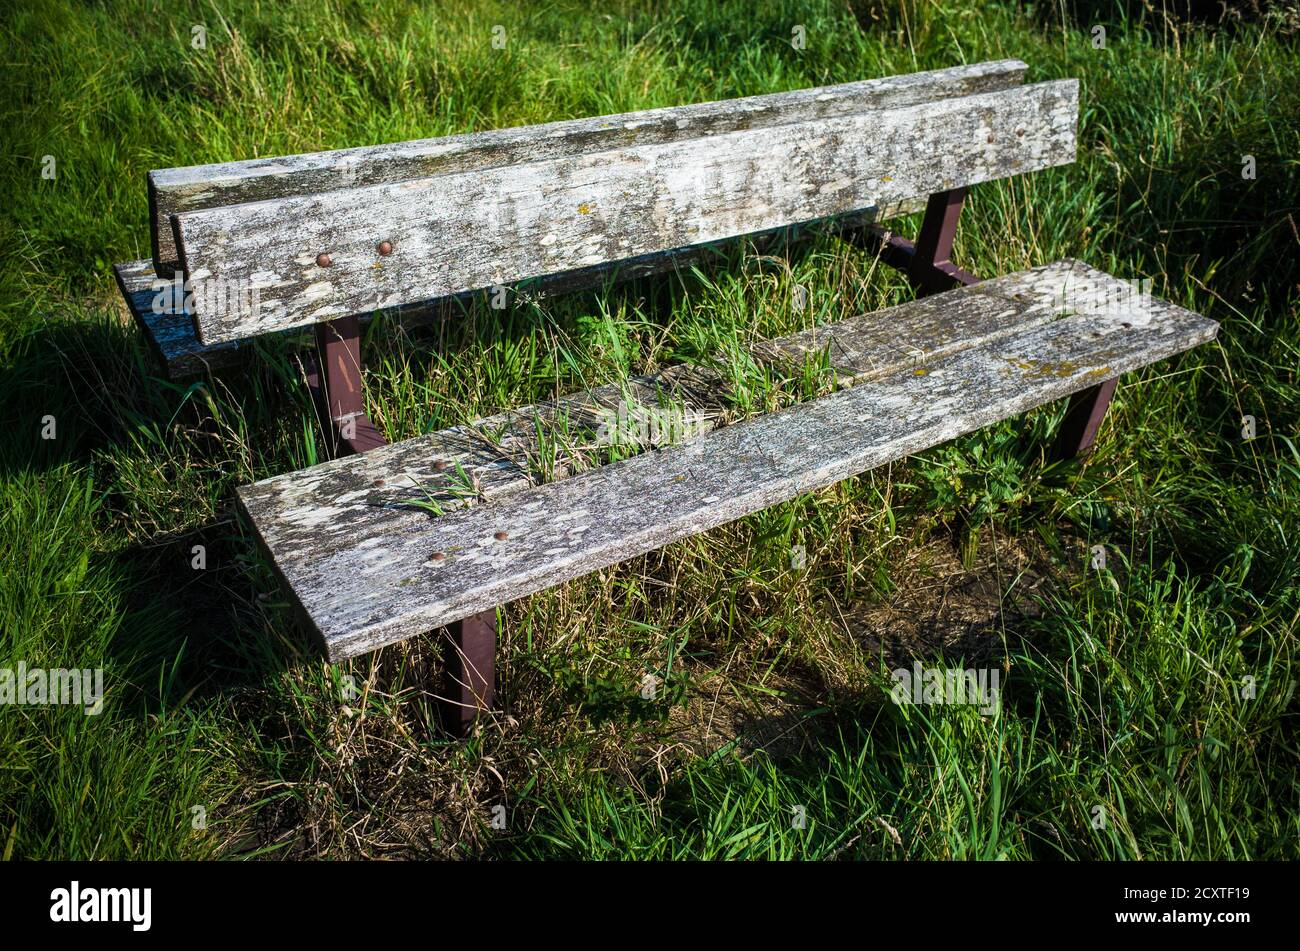 An old, wooden abandoned bench overgrown with weeds. Stock Photo